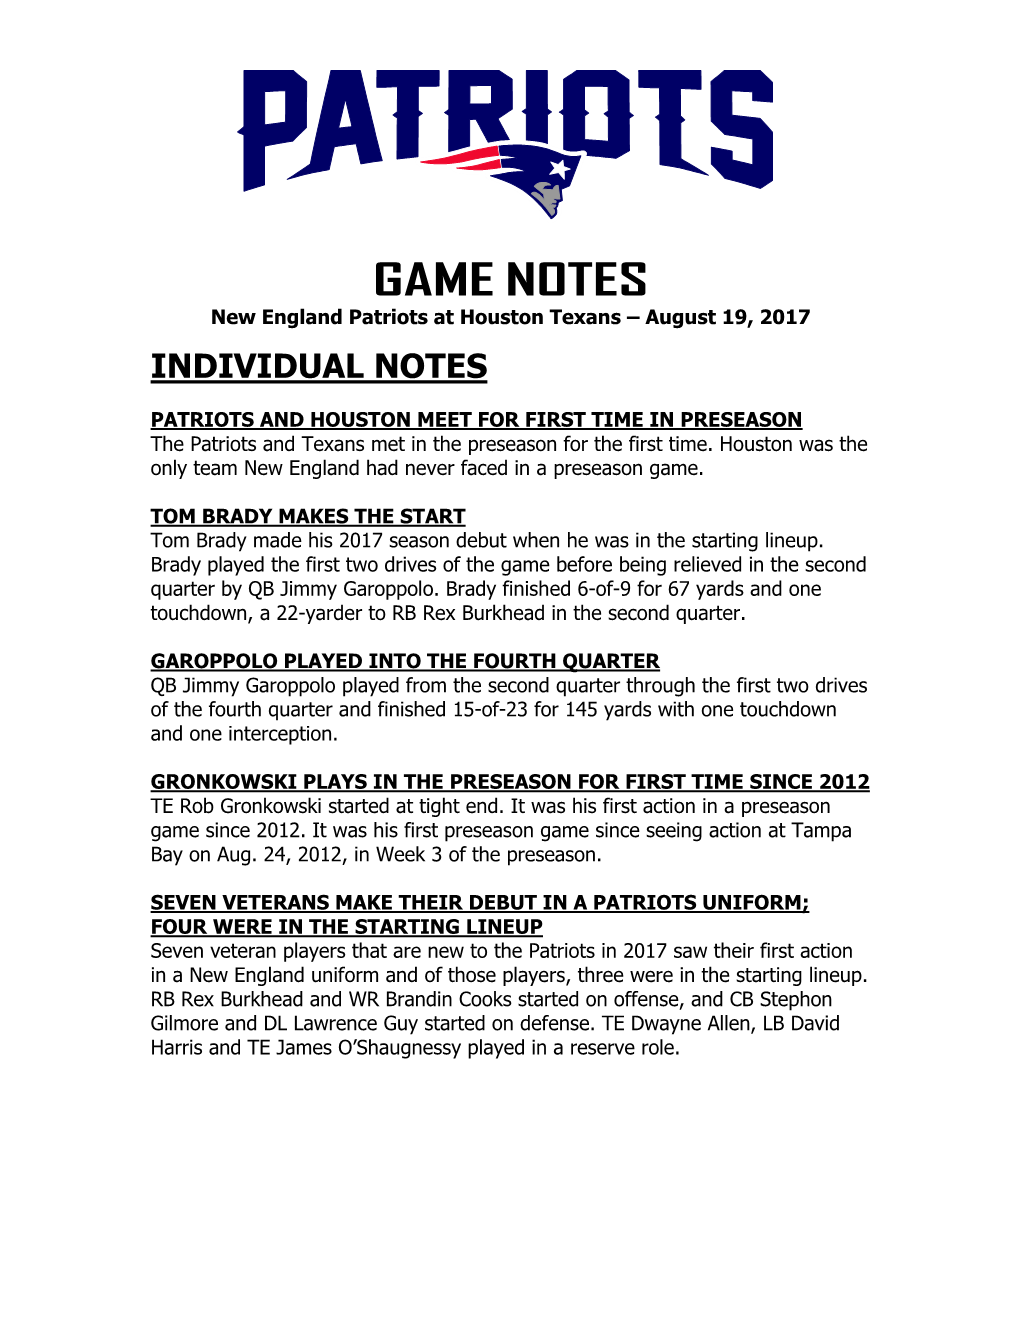 GAME NOTES New England Patriots at Houston Texans – August 19, 2017